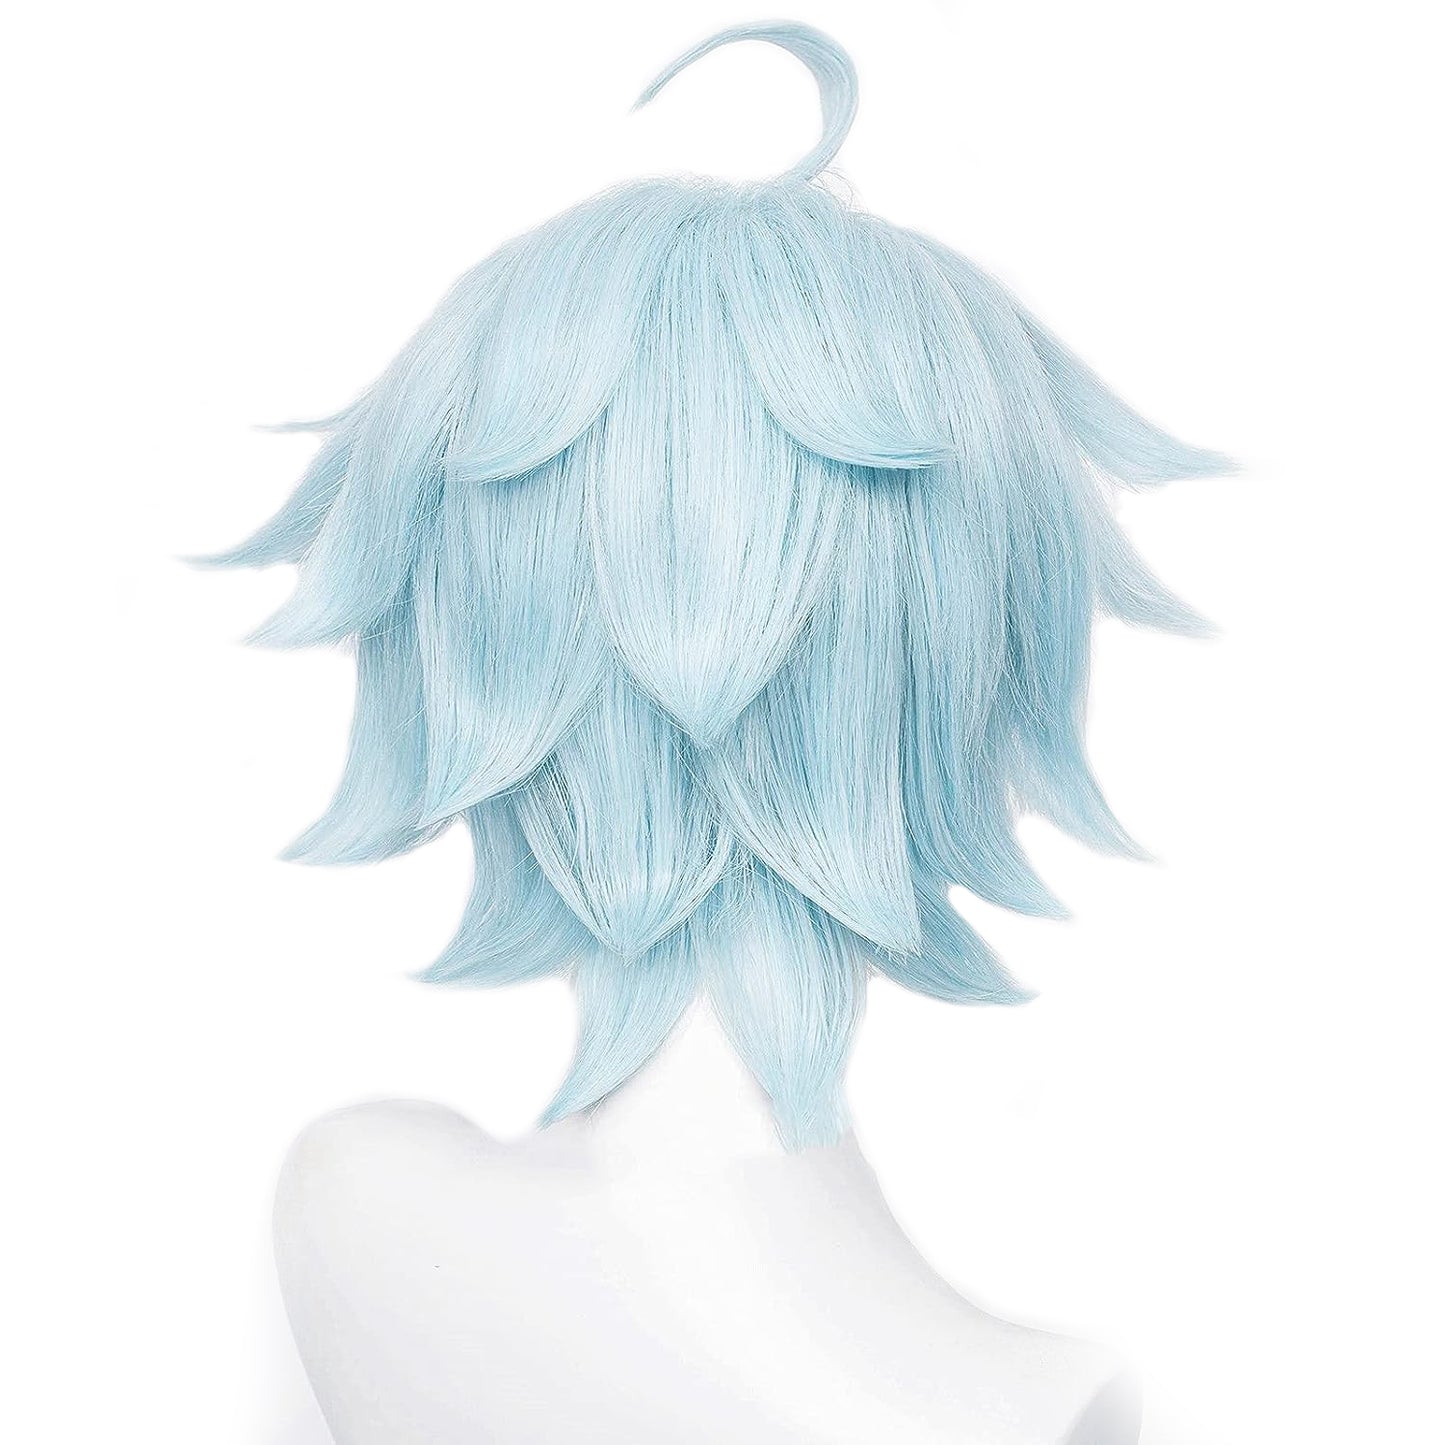 Chill in Style: Chongyun Cosplay Wig from Genshin Impact